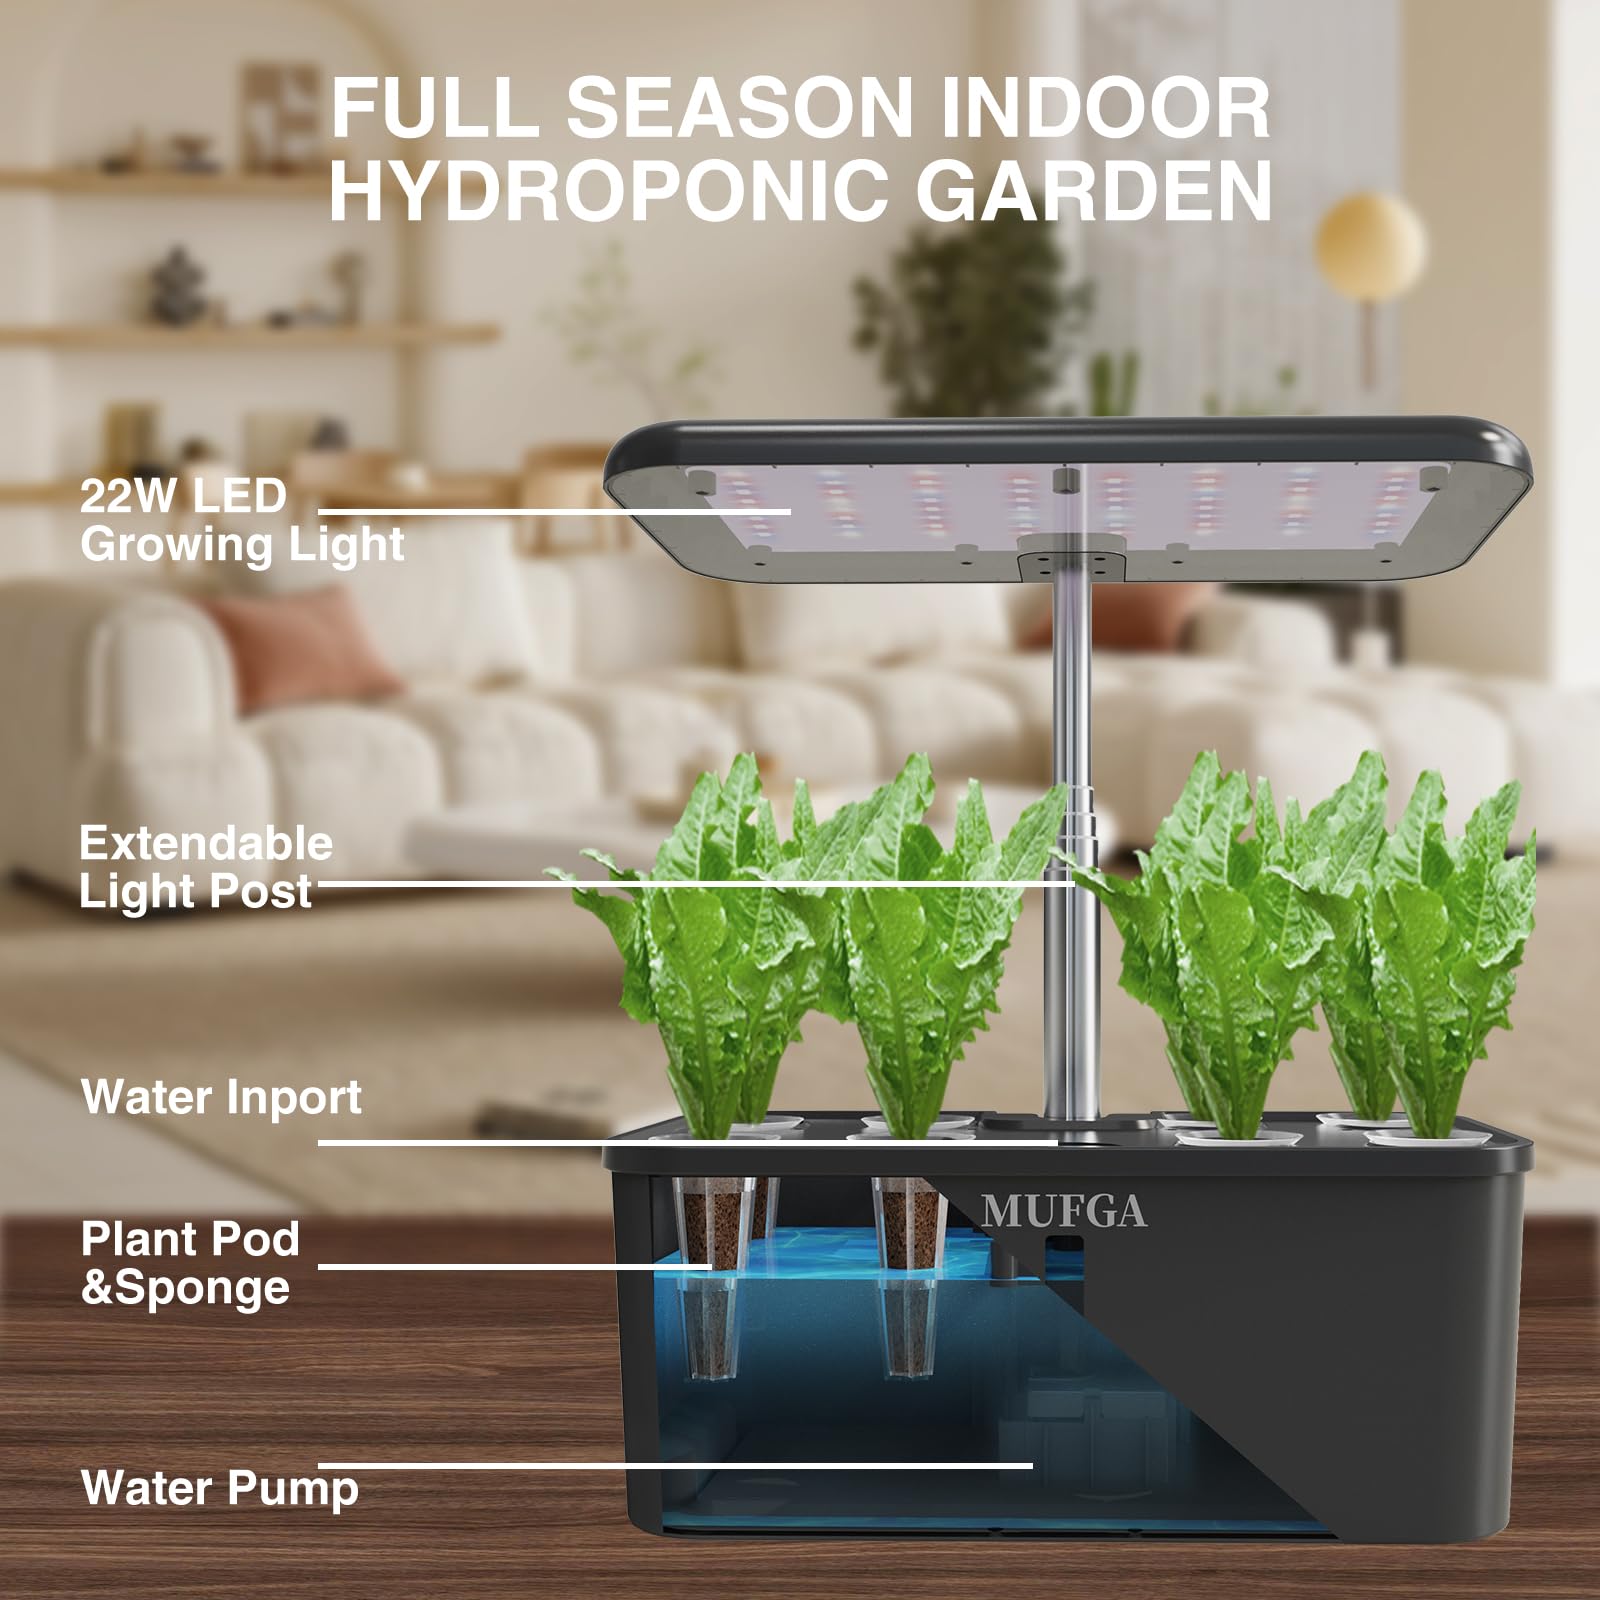 Indoor Garden Hydroponics Growing System - MUFGA 8 Pods Herb Garden Kit Indoor with LED Grow Light, Plants Germination Kit(No Seeds) with Pump System,Height Adjustable, Gift for Women, Black, Black